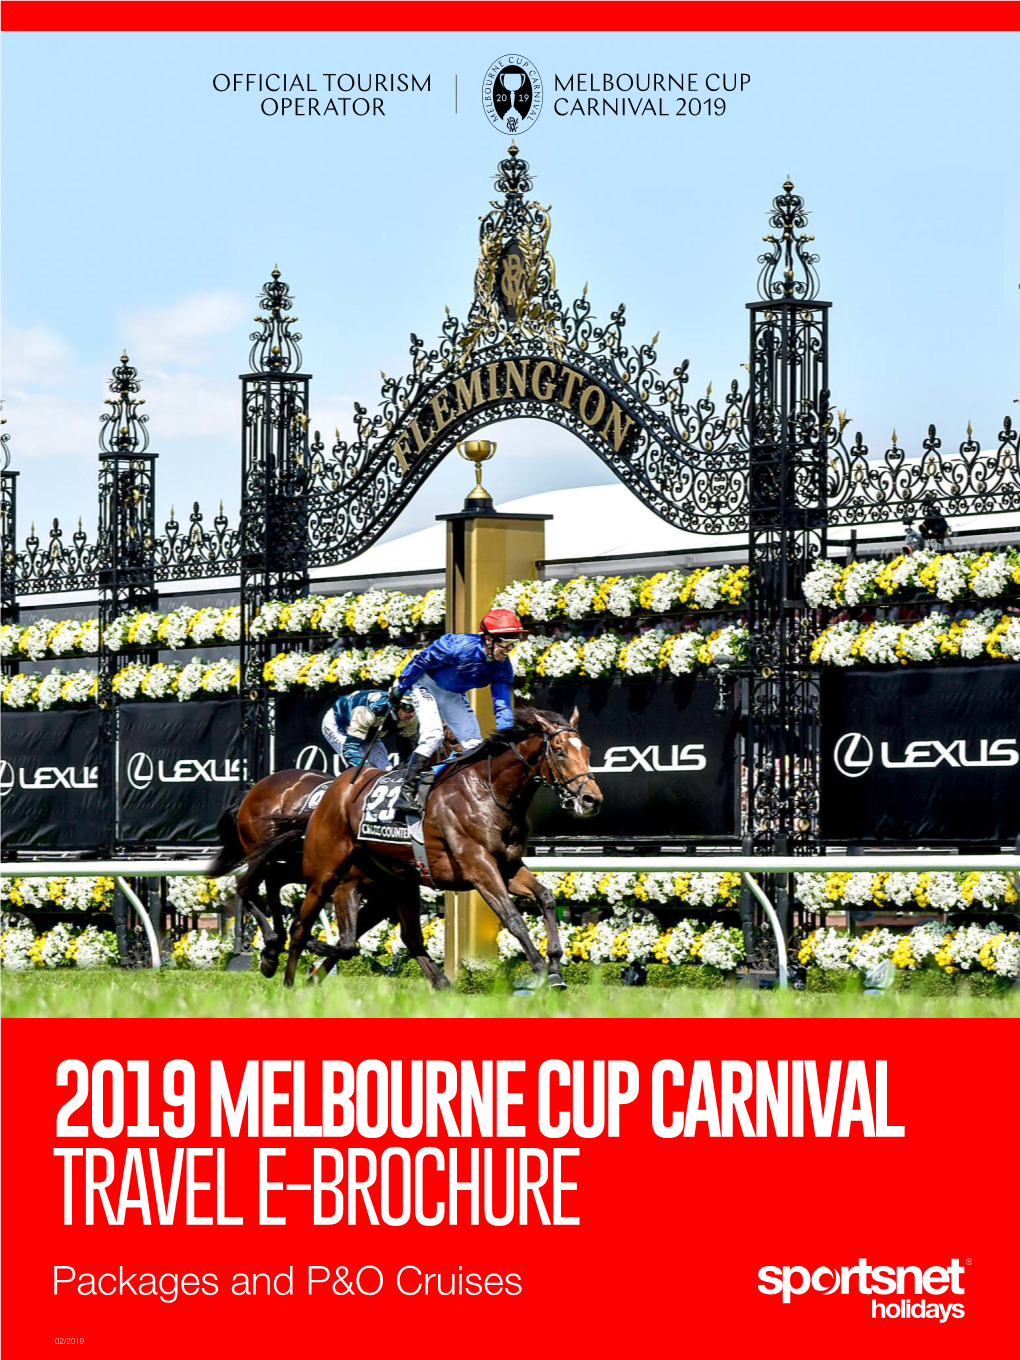 2019 MELBOURNE CUP CARNIVAL TRAVEL E-BROCHURE Packages and P&O Cruises